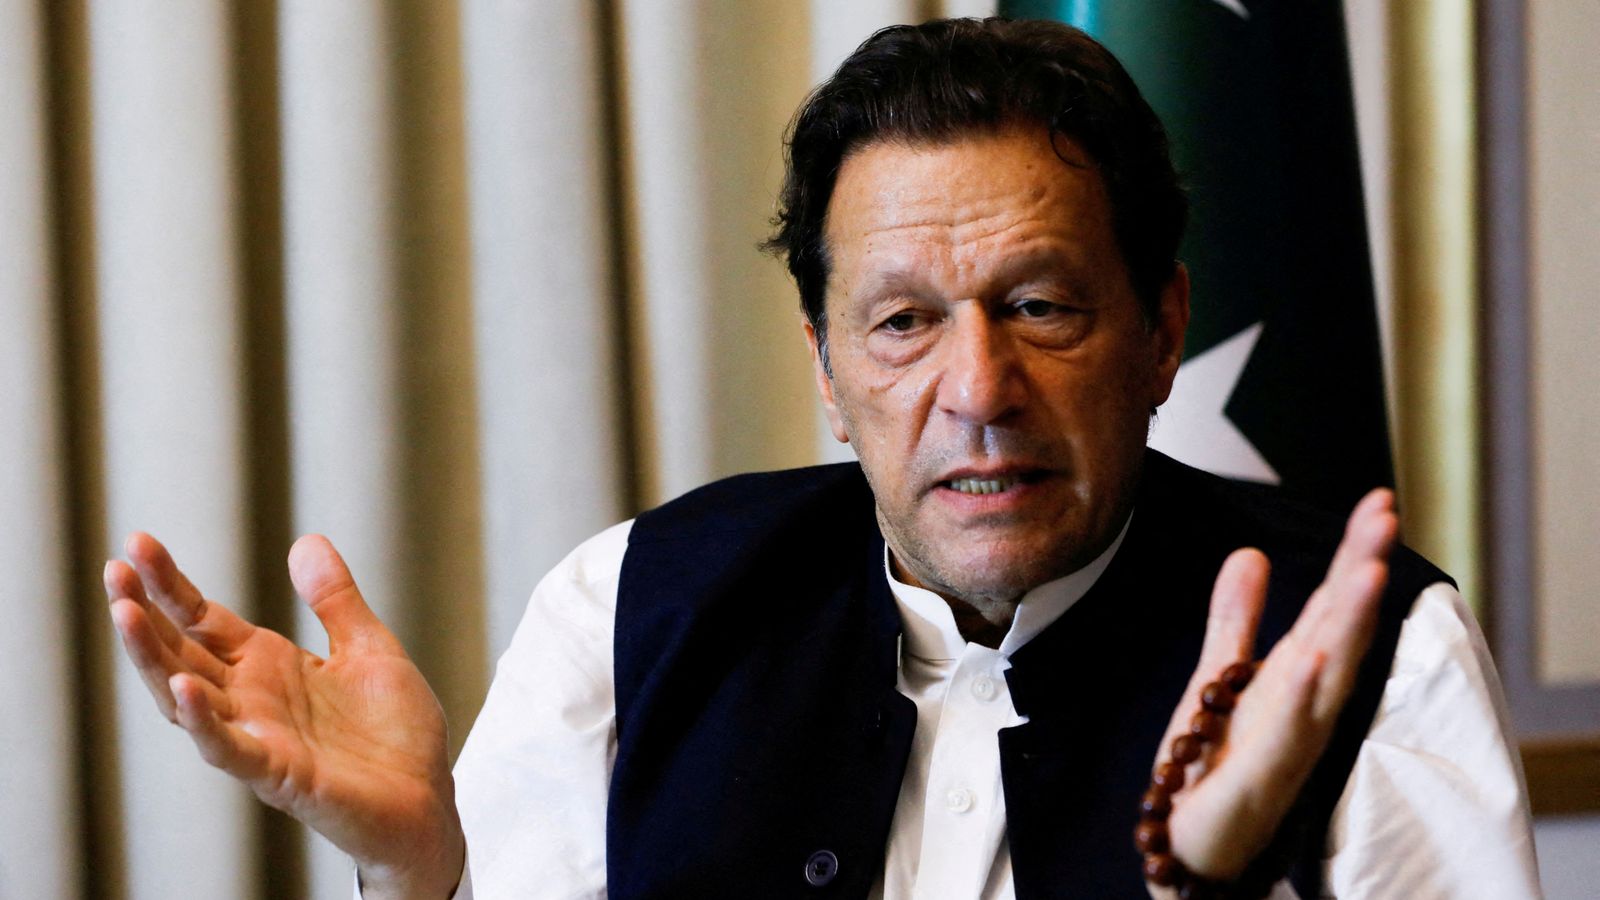 Imran Khan: Former Pakistan prime minister's trial from jail is 'illegal', lawyer says